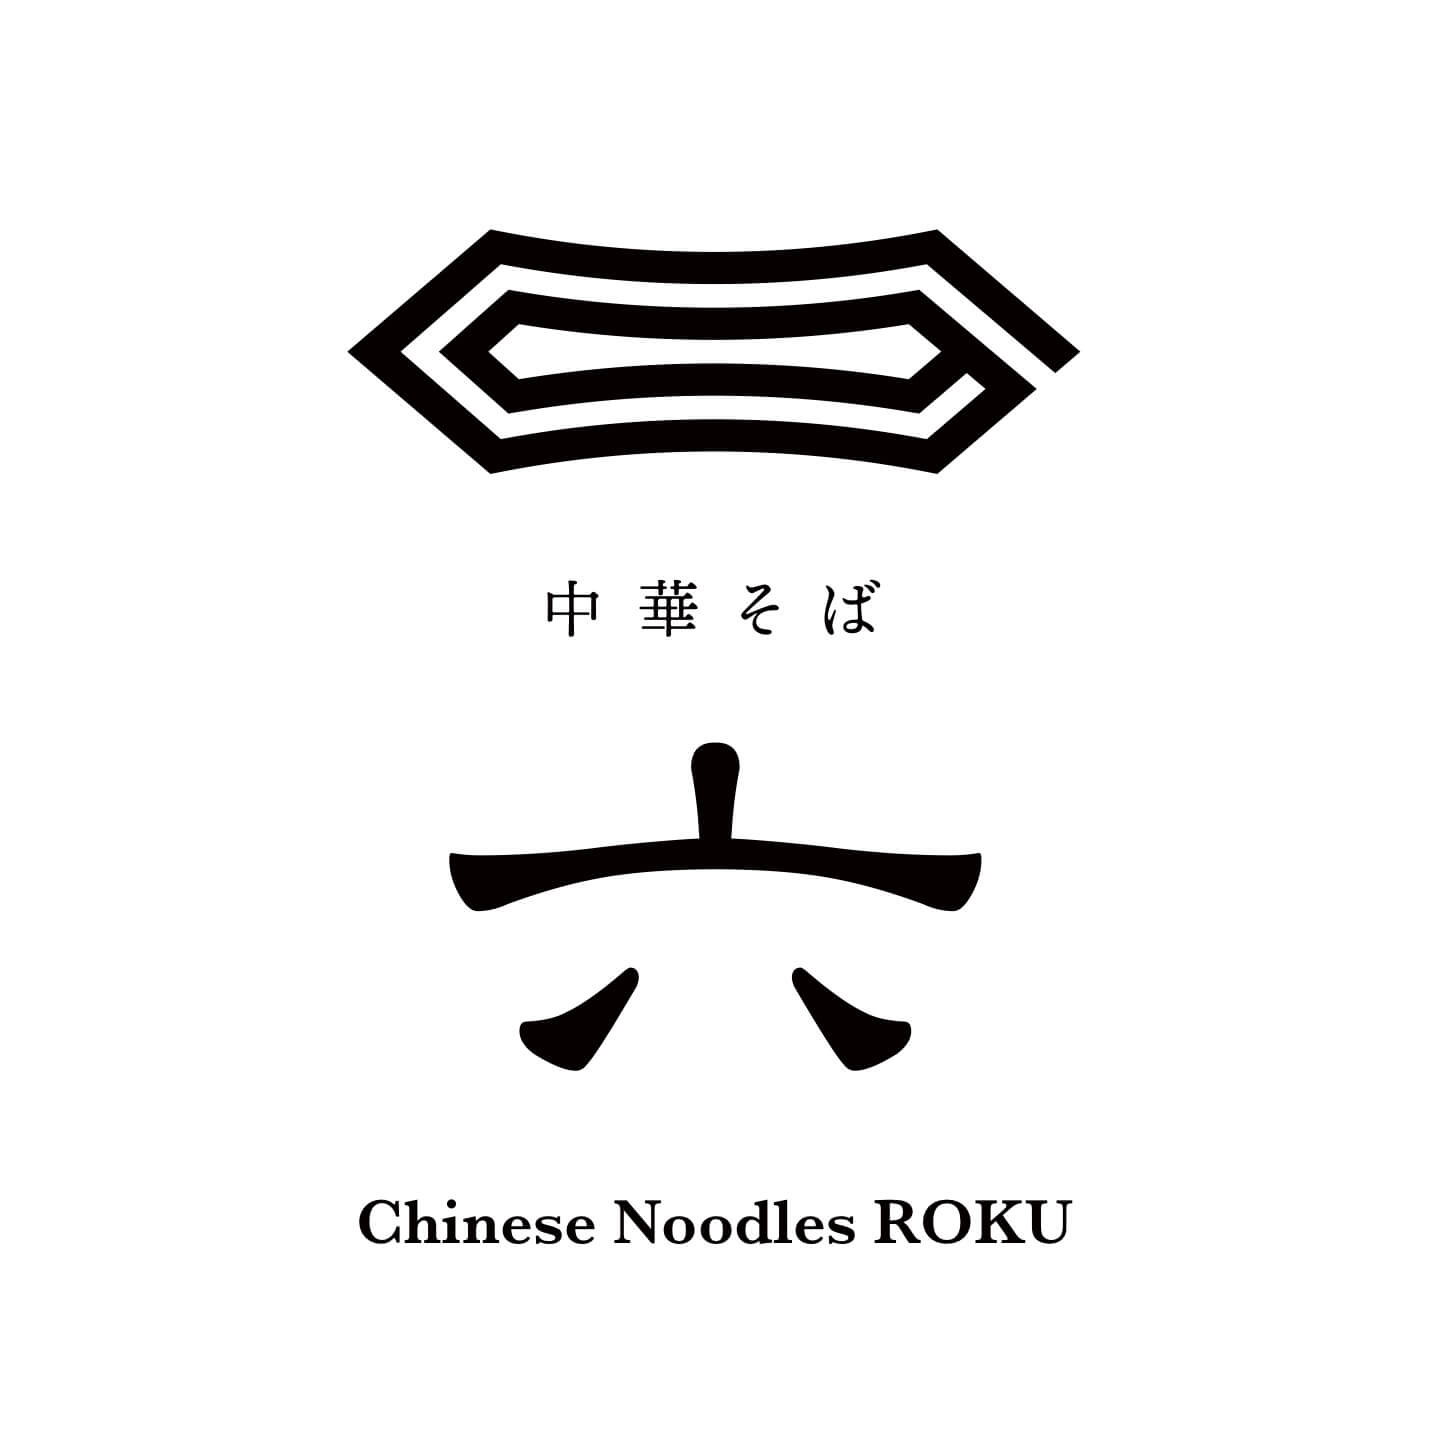 Chinese noodles roku